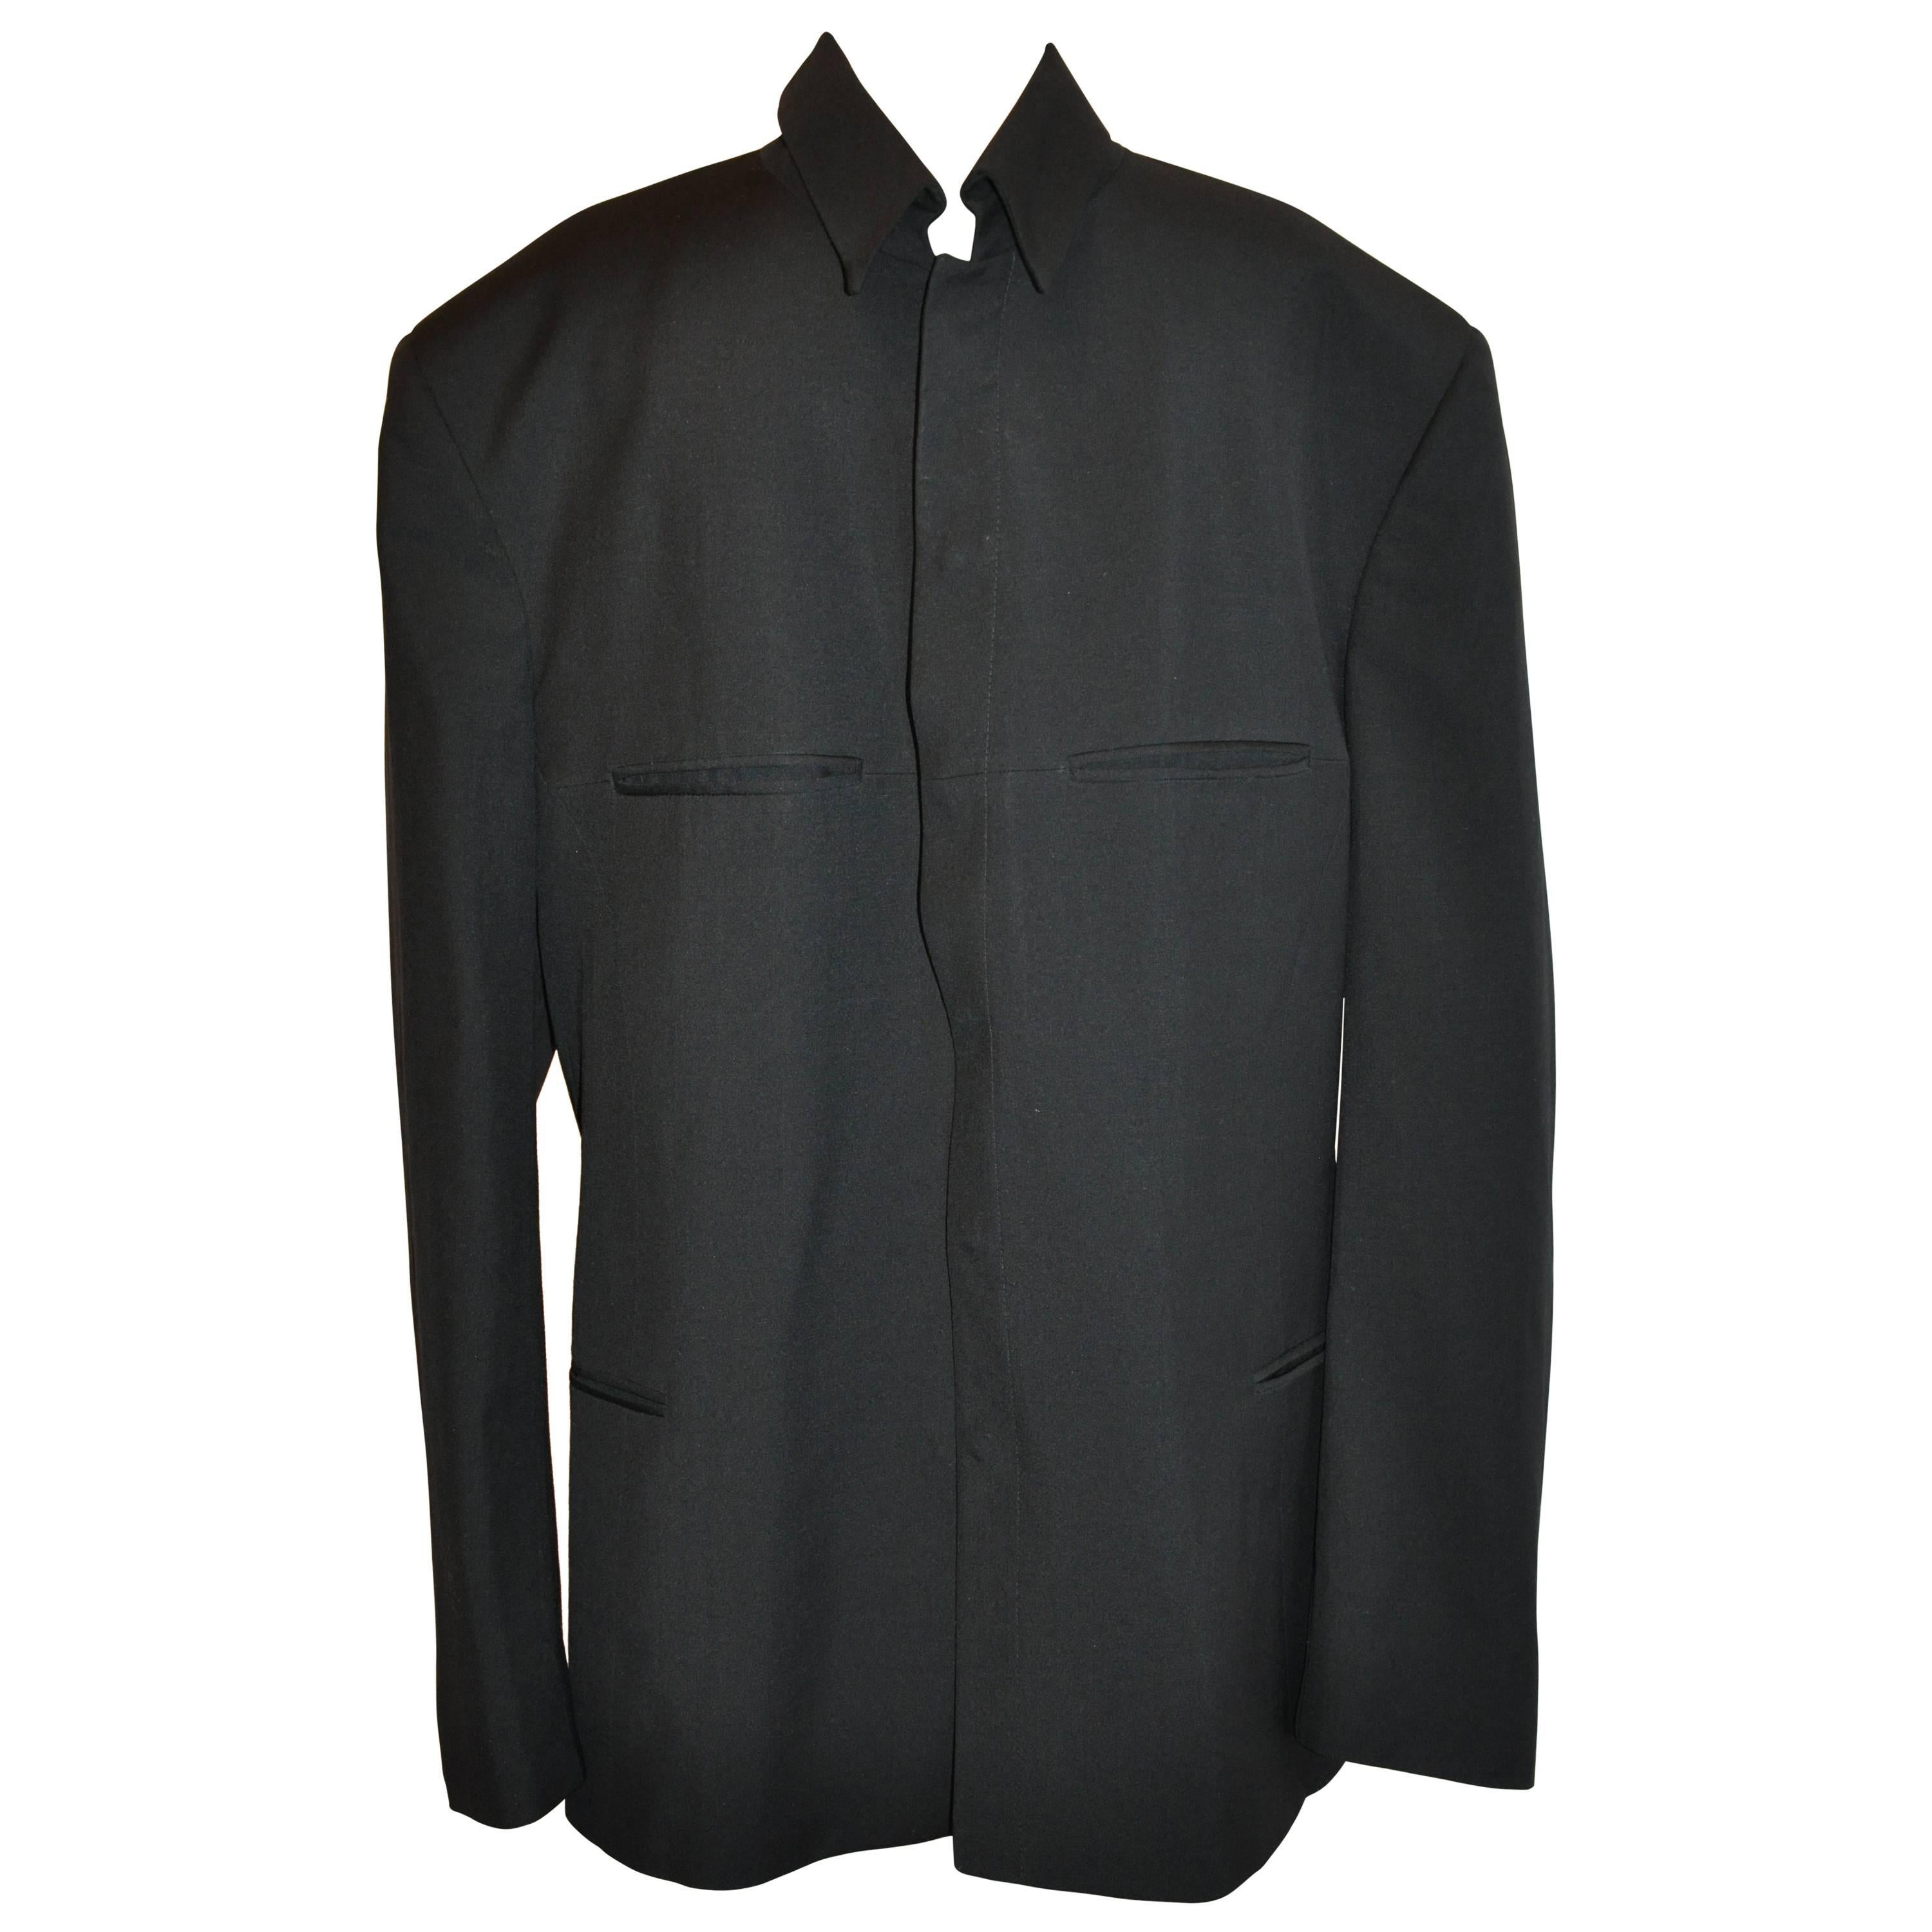 Thierry Mugler Men's Black Snap-Front Evening Jacket For Sale